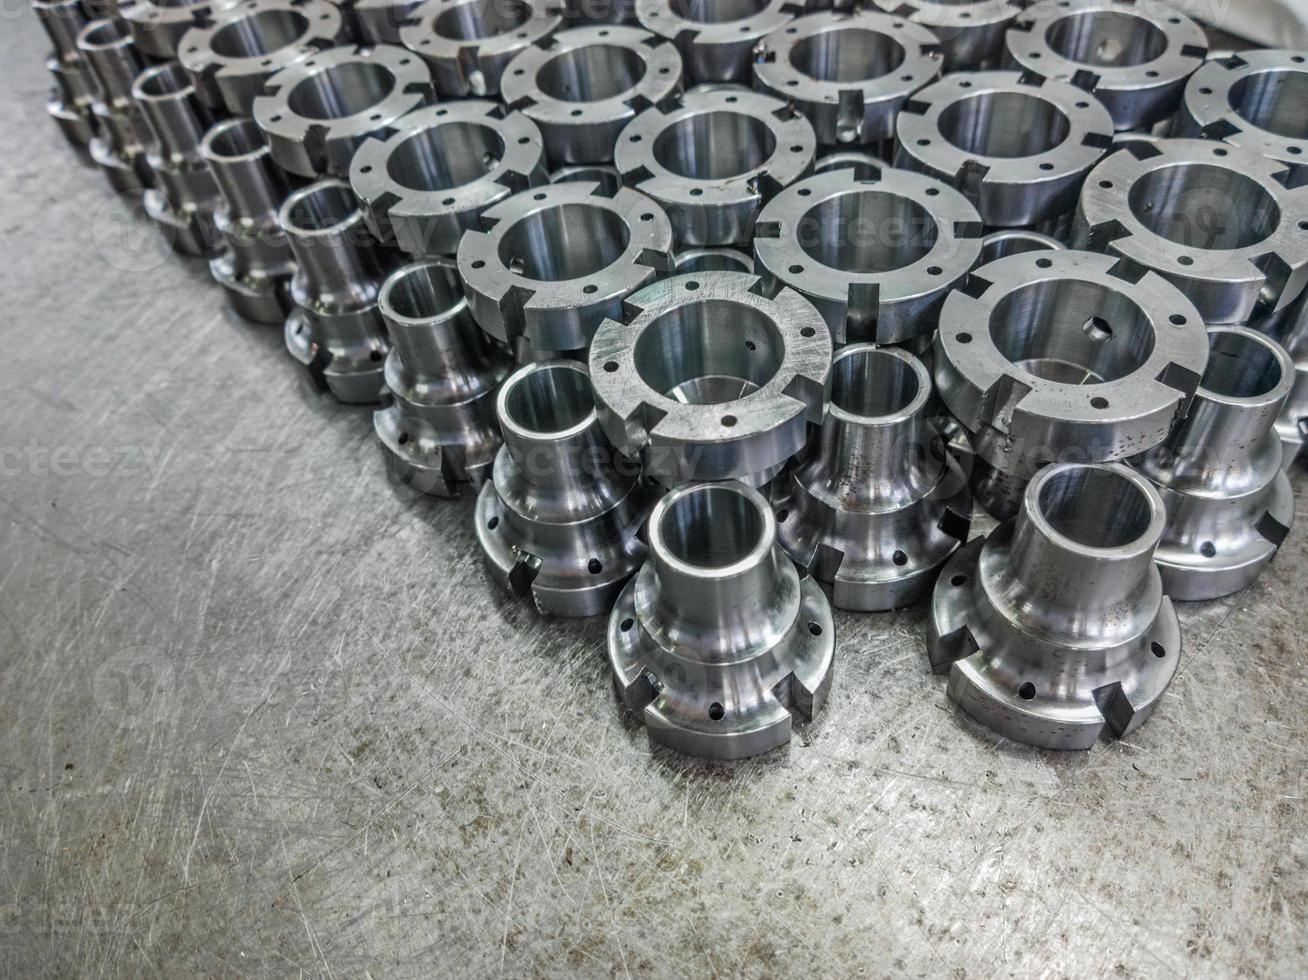 Shiny steel parts after cnc turning and milling, industrial background photo